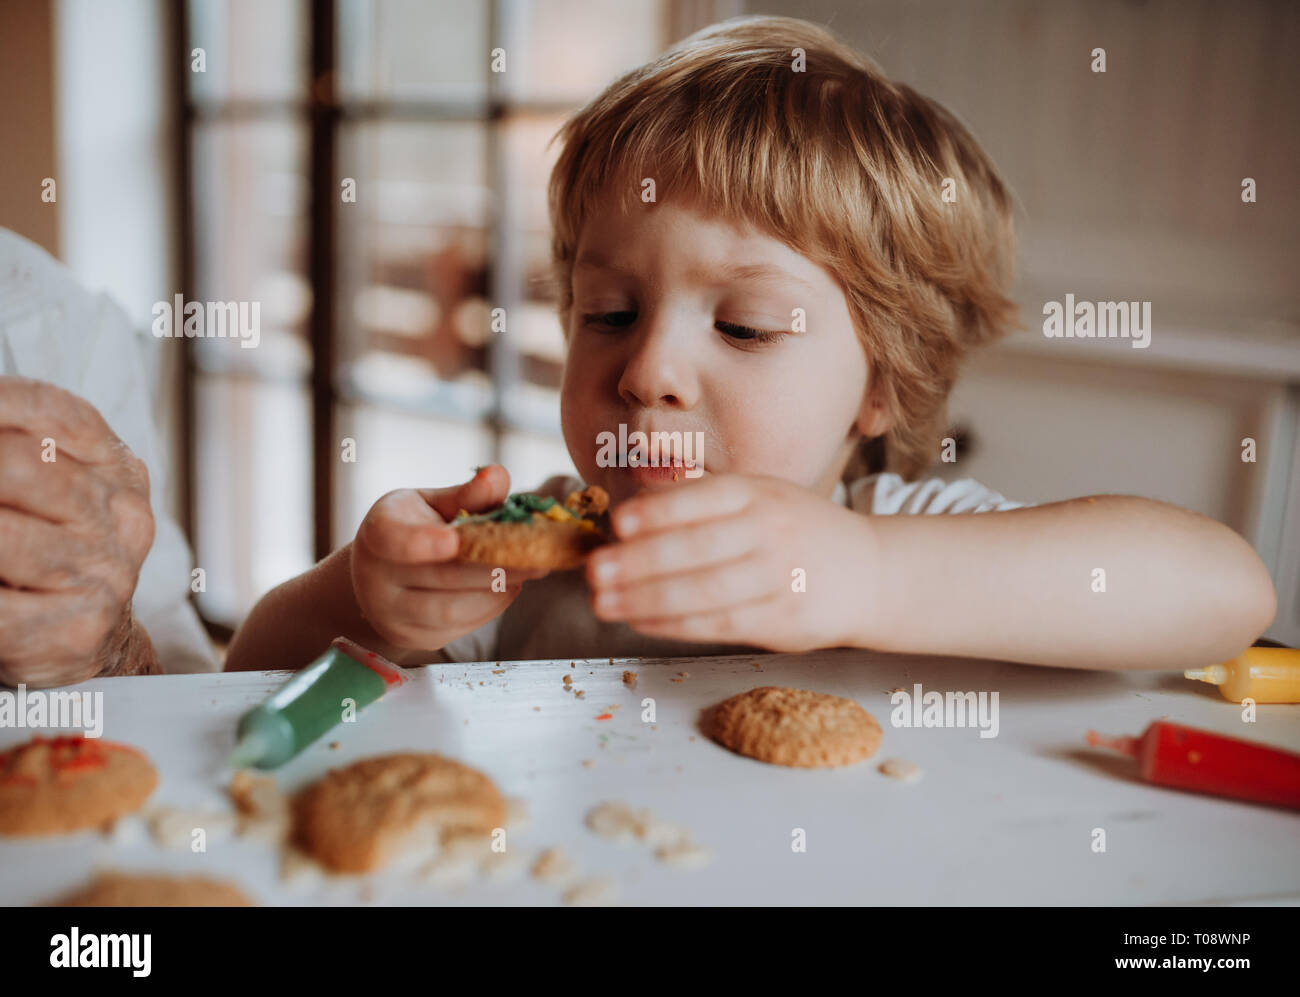 A small toddler boy sitting at the table, decorating and eating cakes at home. Stock Photo